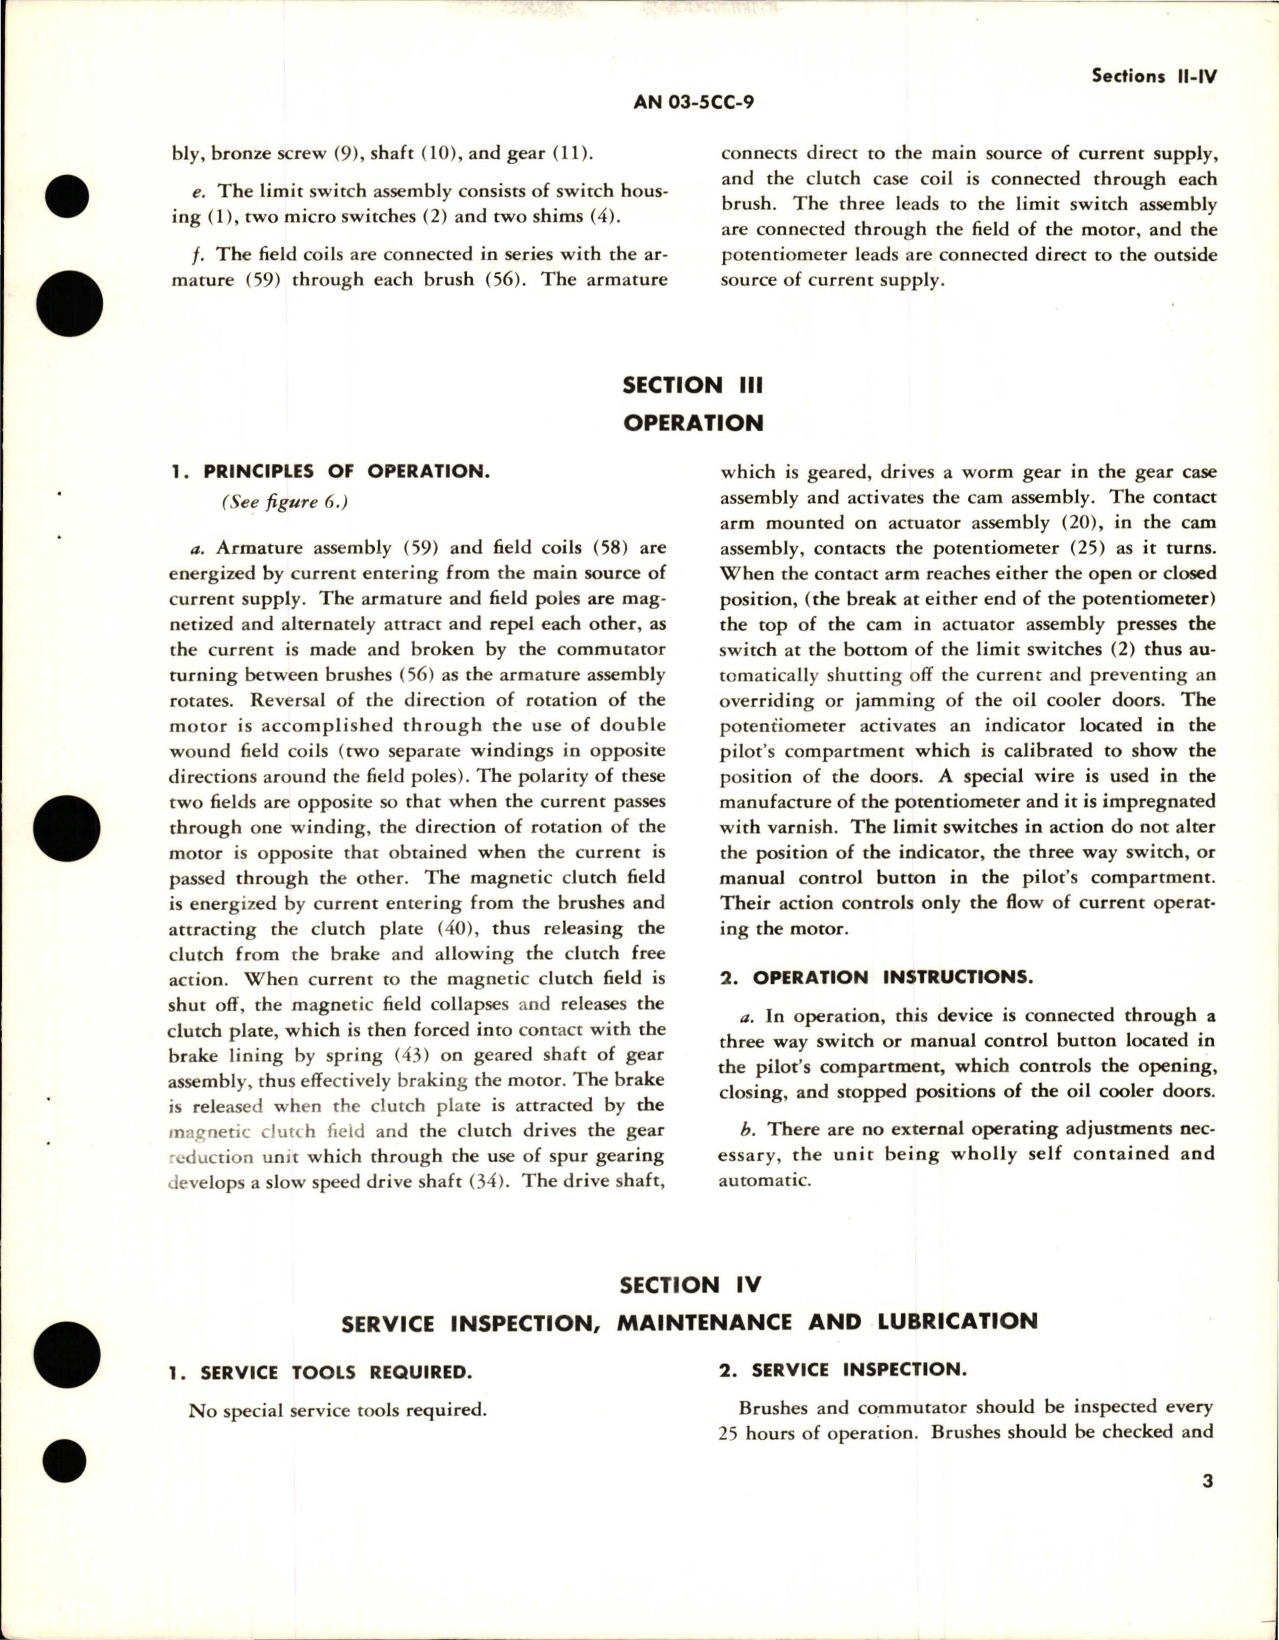 Sample page 7 from AirCorps Library document: Instructions with Parts Catalog for Oil Cooler Door Motor - Type DAG Model 115